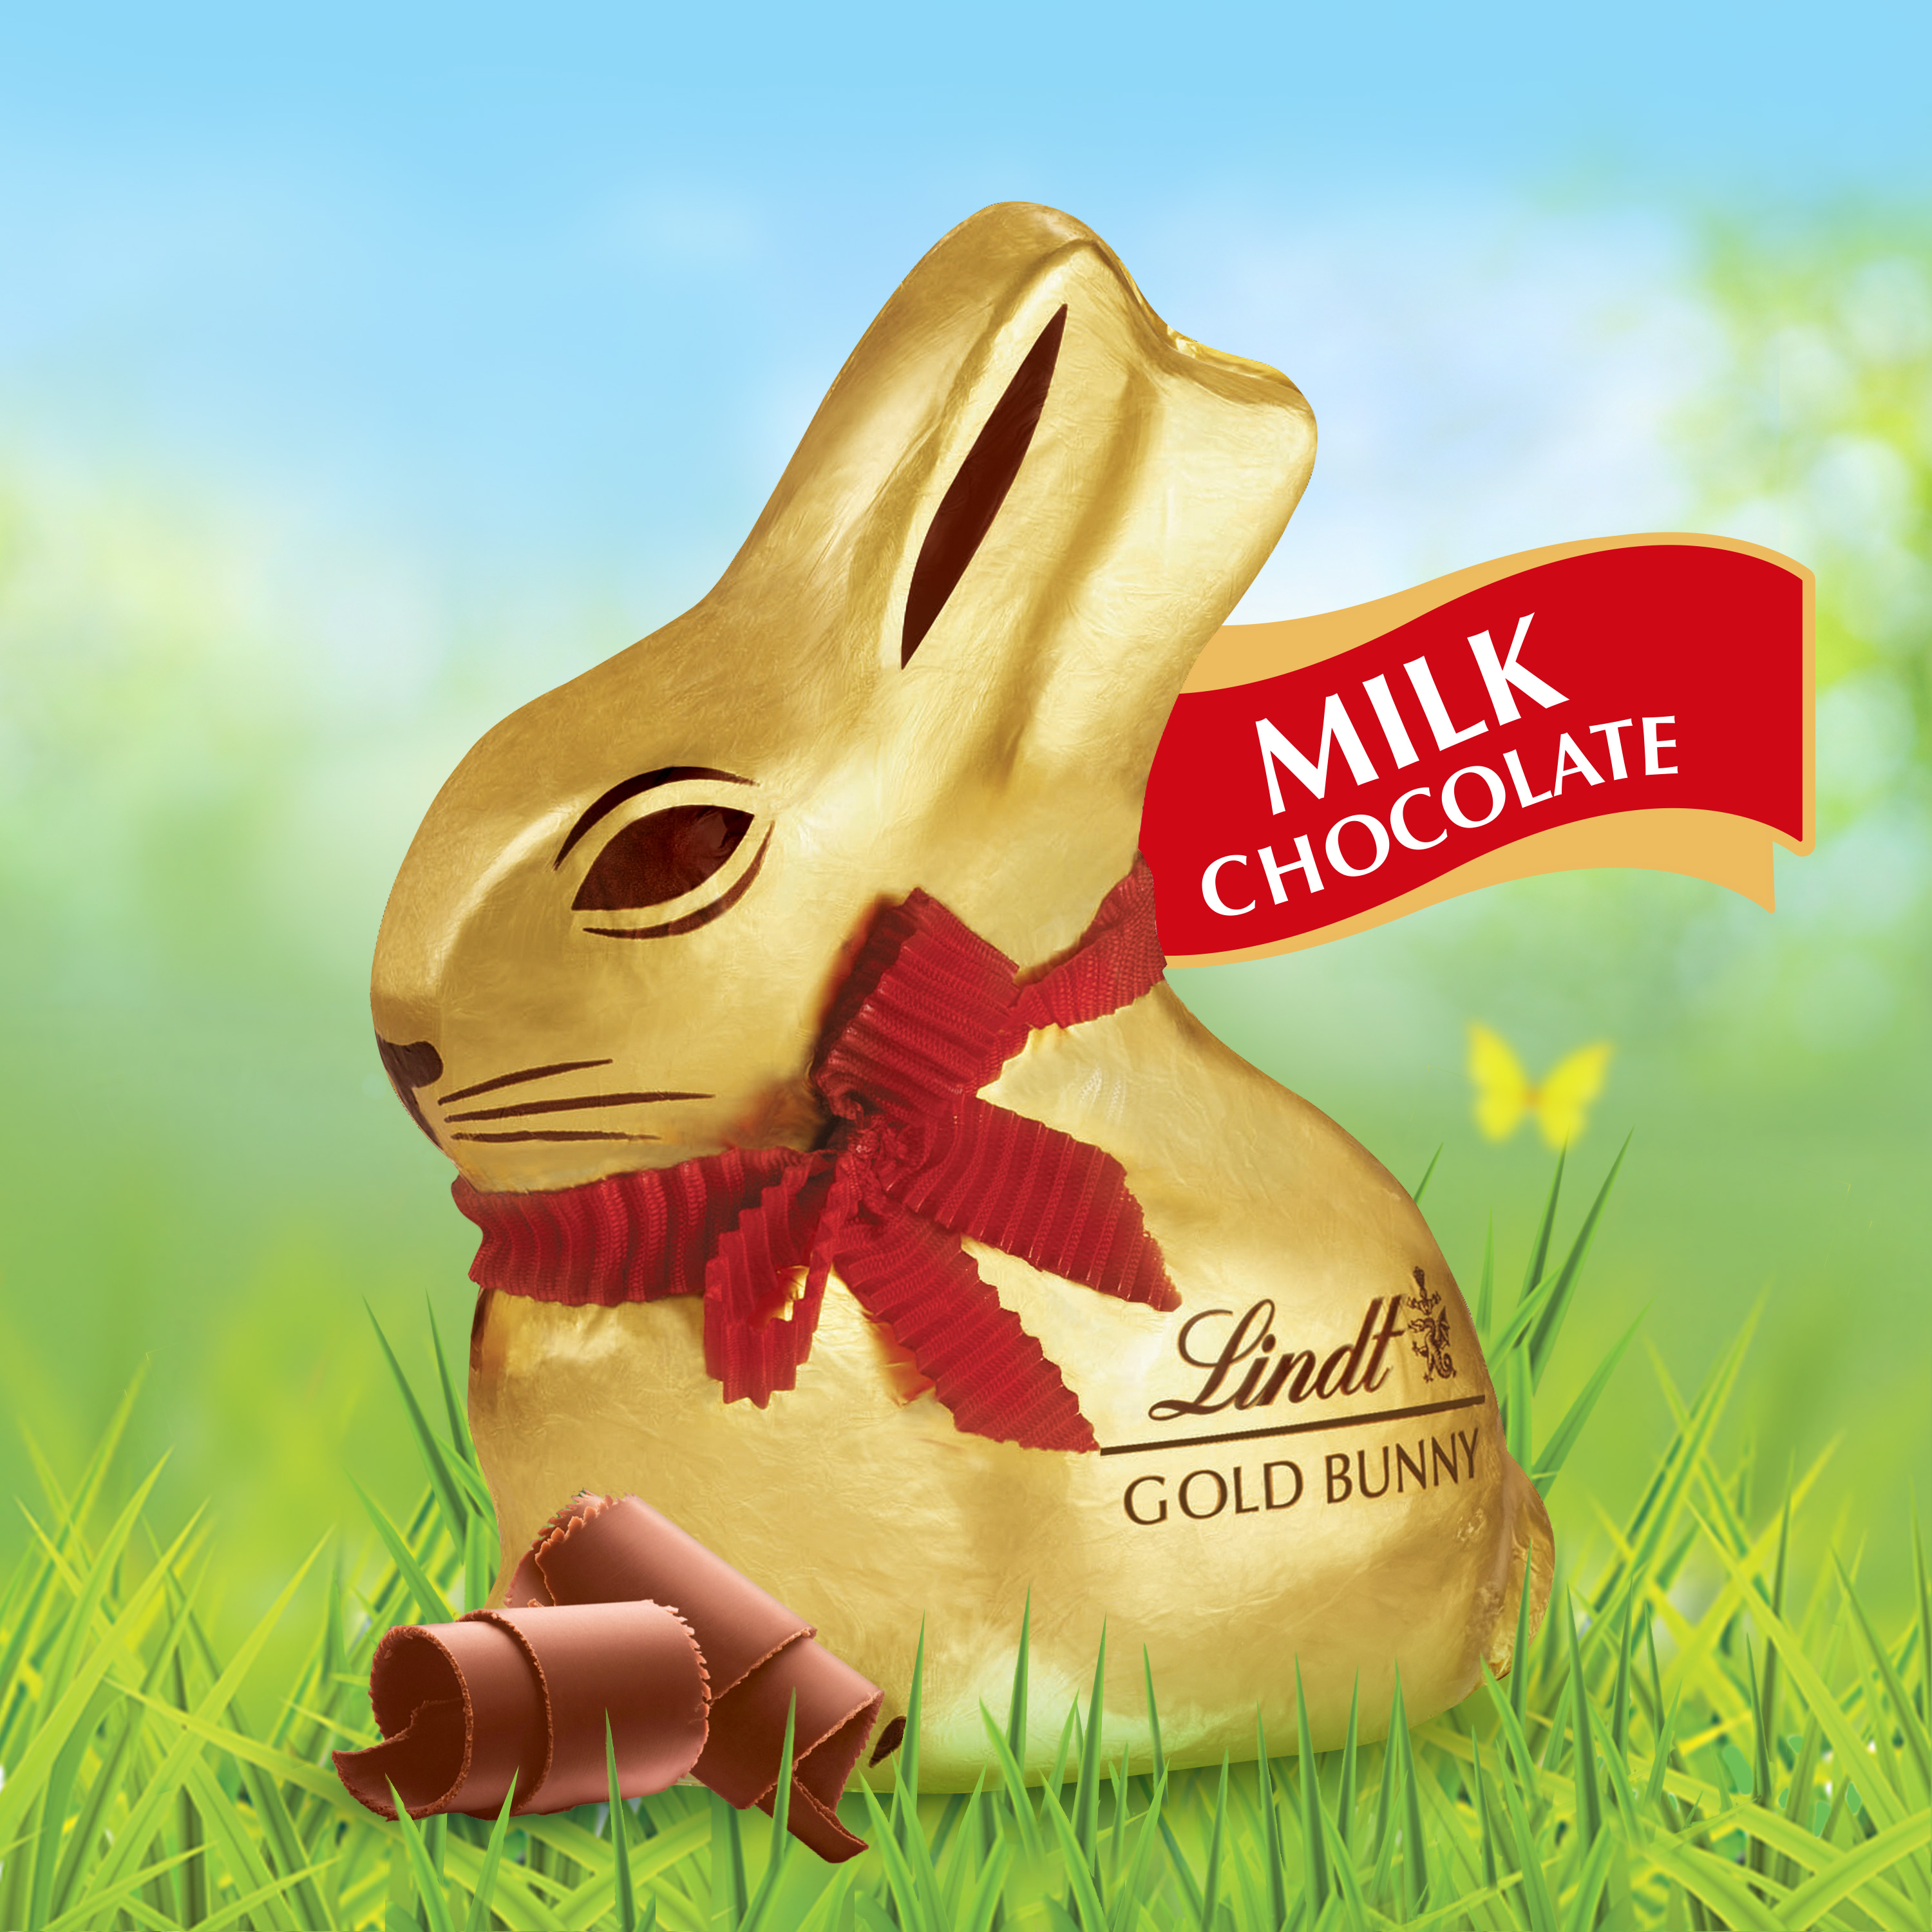 Lindt Gold Bunny, Milk Chocolate, Easter Chocolate Candy Bunny, 3.5 oz, 1 Count - image 2 of 12